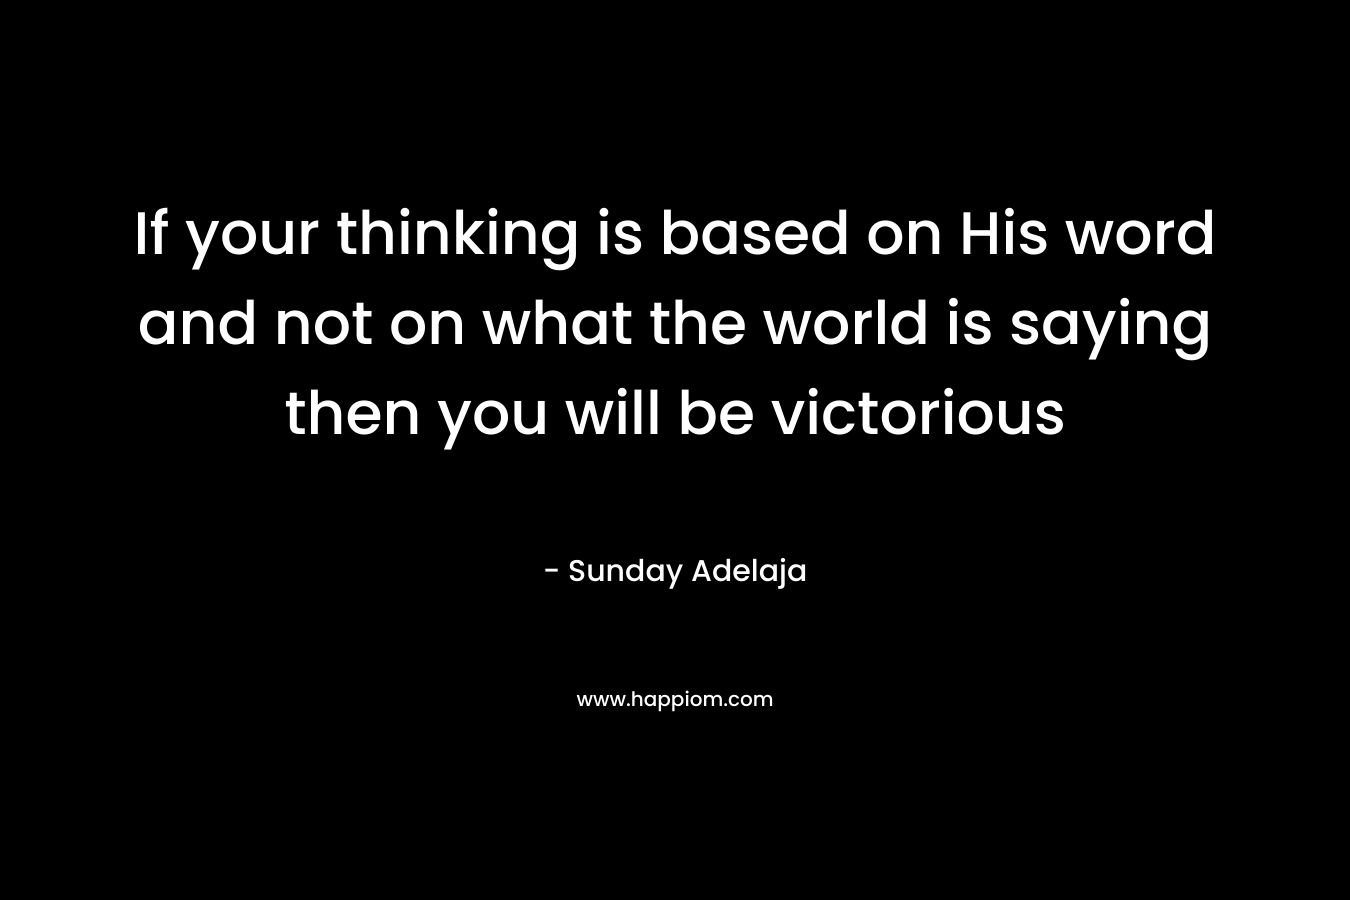 If your thinking is based on His word and not on what the world is saying then you will be victorious